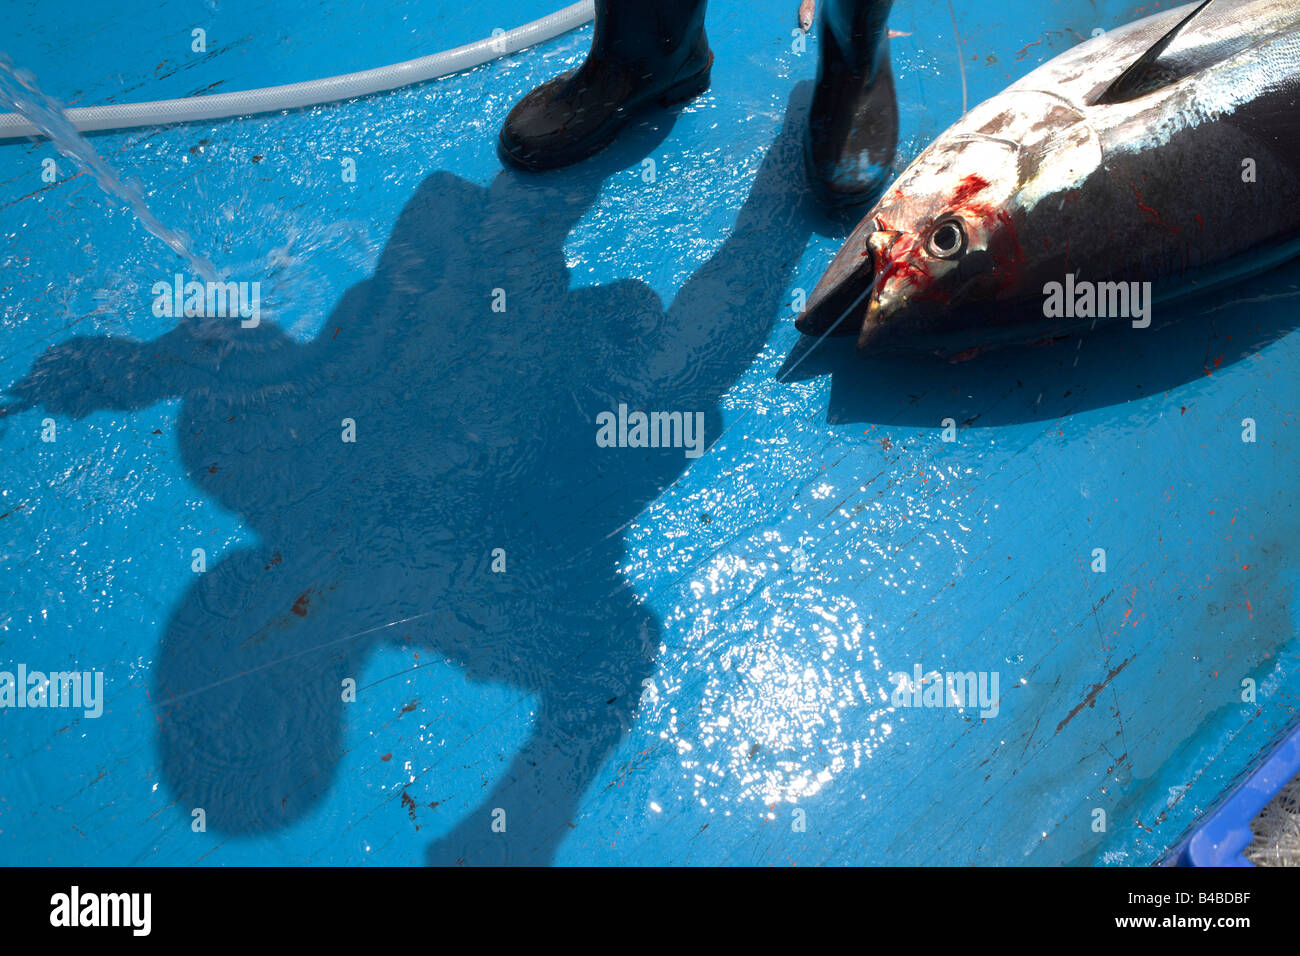 Hosing down a freshly-killed line caught yellowfin tuna fish on the blue deck of a traditional dhoni fishing boat, Maldives Stock Photo